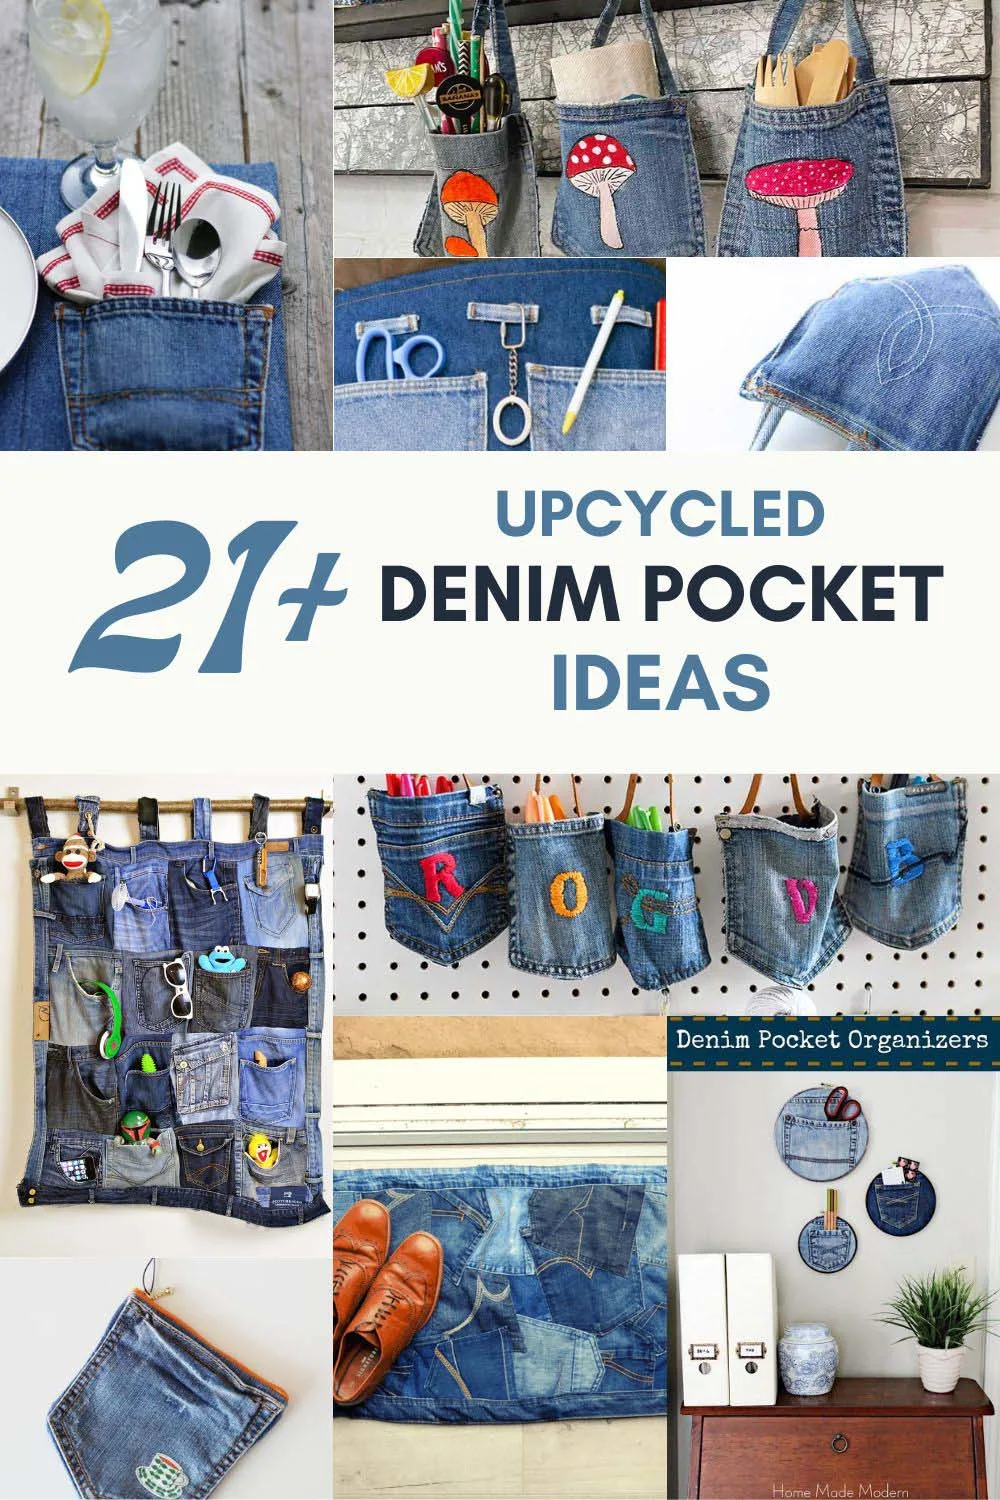 DIY Space Embroidered Denim Jeans Pocket : 10 Steps (with Pictures) -  Instructables